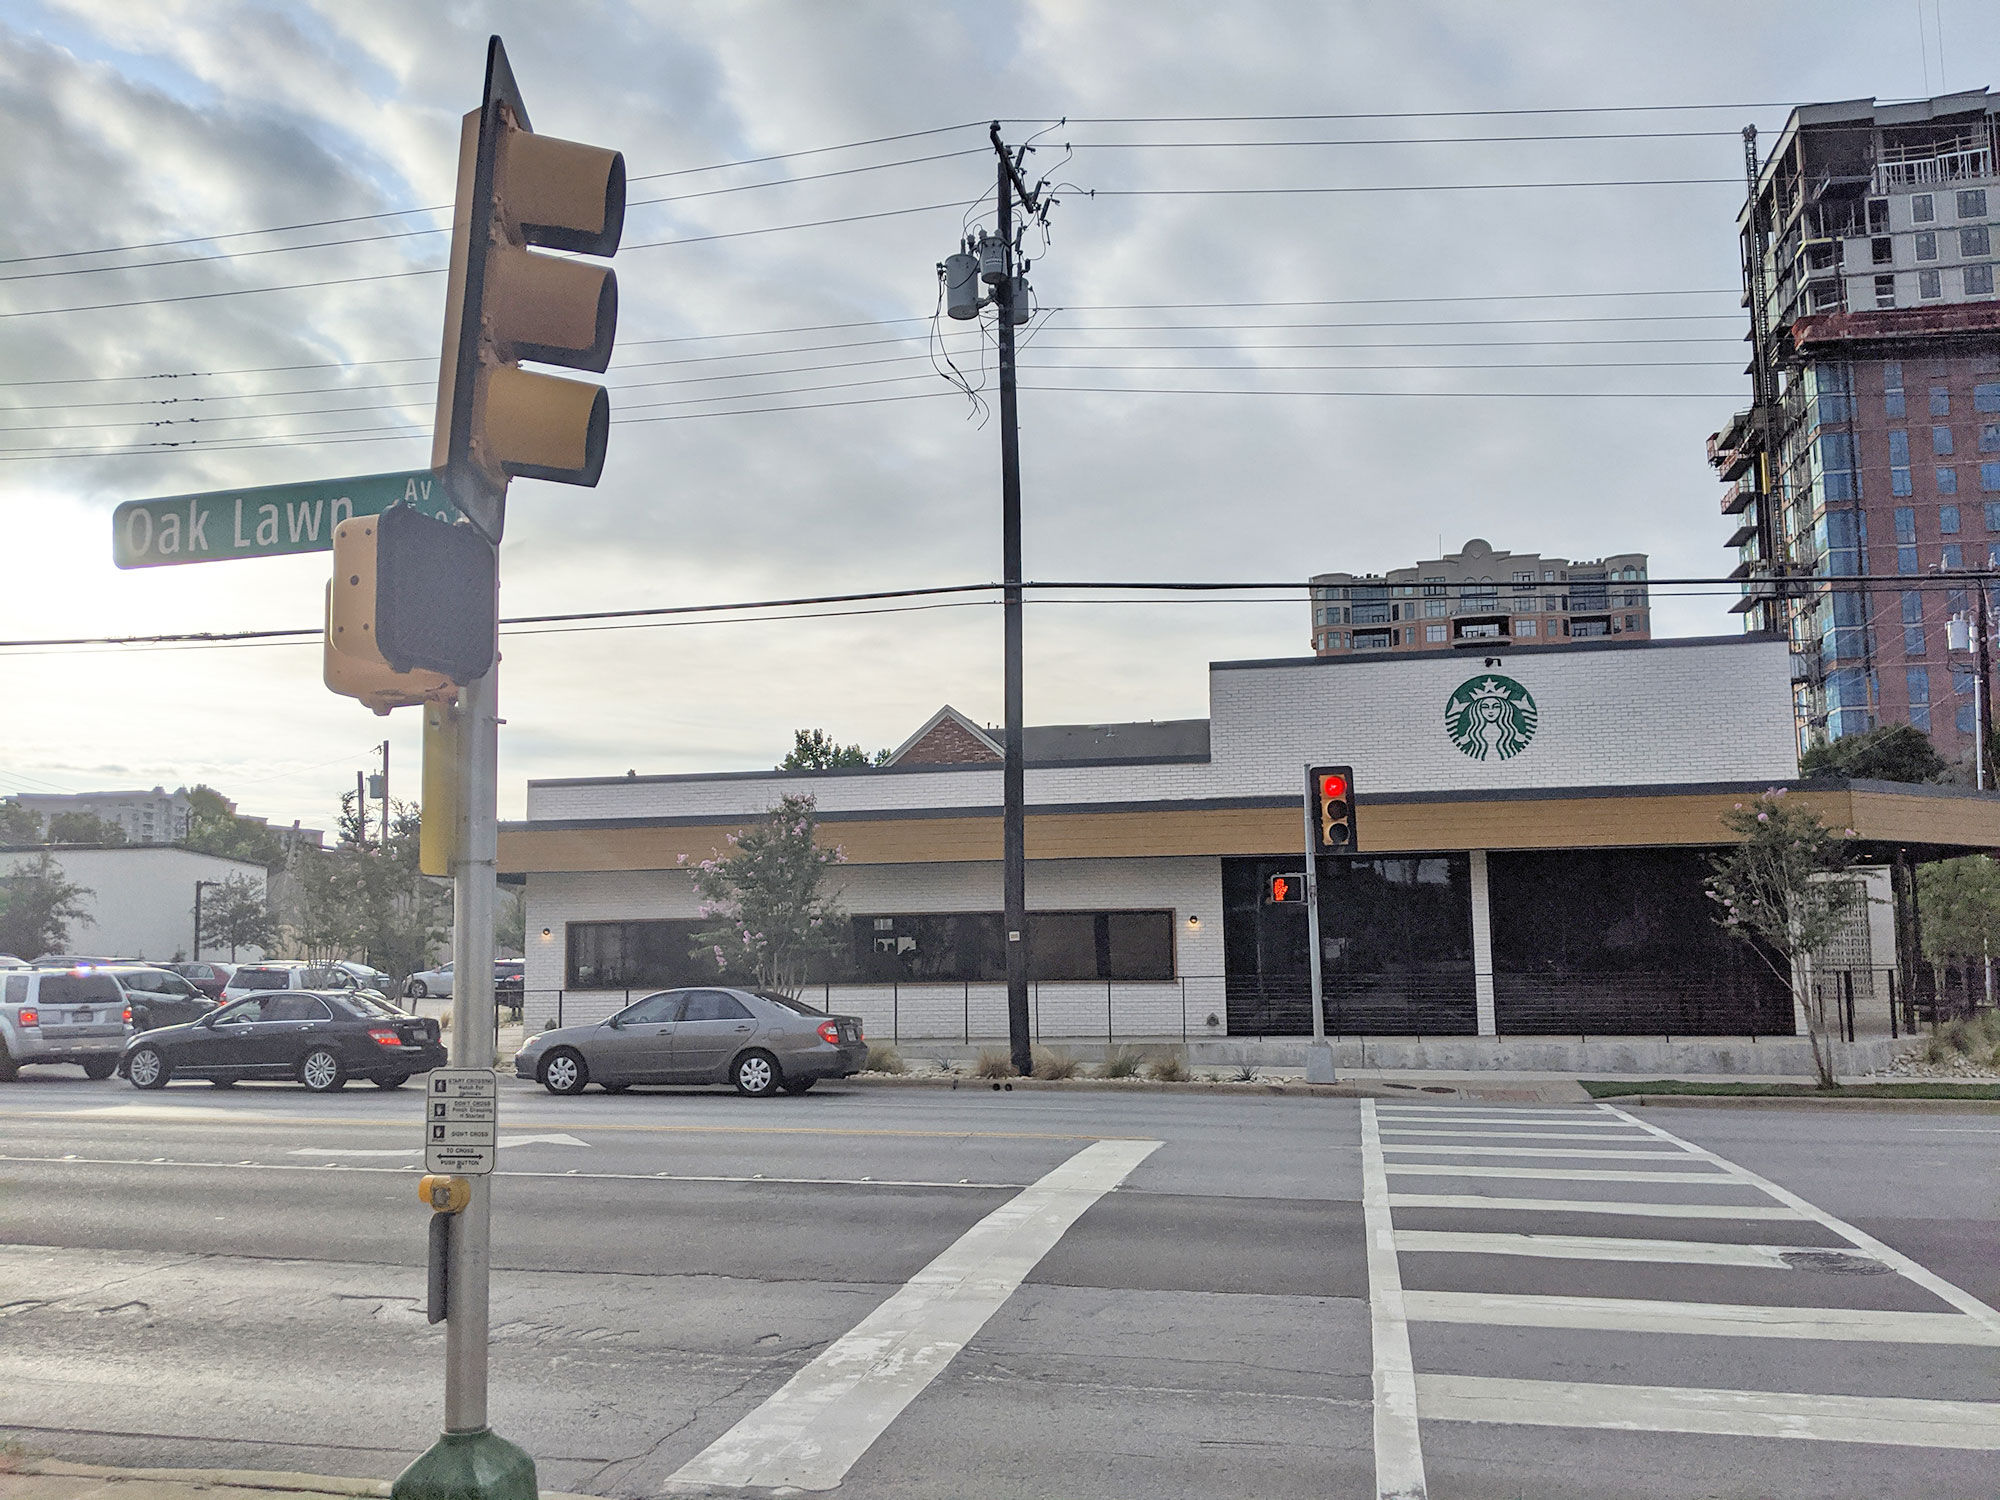 A traffic jam on Oak Lawn Avenue caused by the new Starbucks Store.